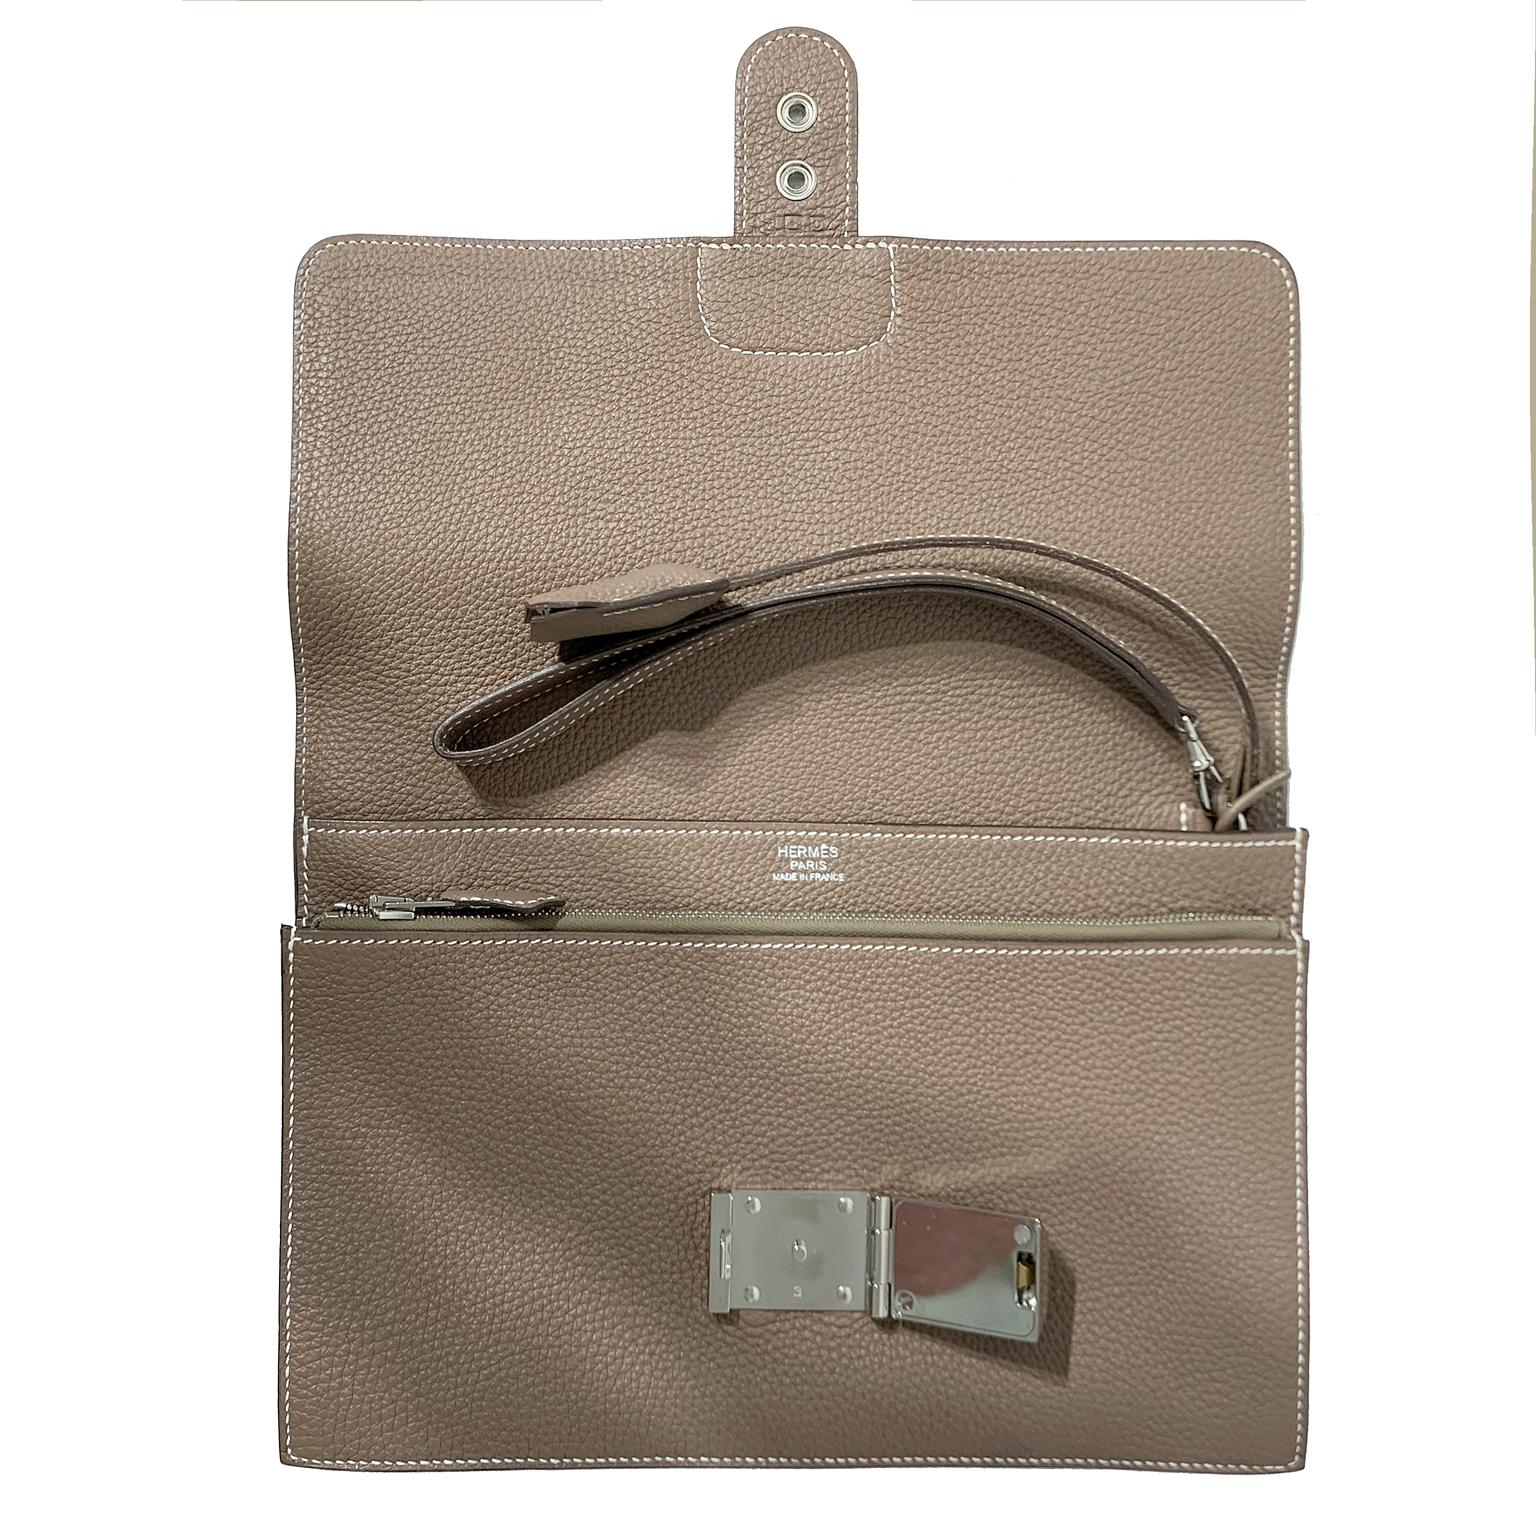 This authentic Hermès Etoupe Togo Jet Clutch is in pristine condition.  Elegant and timeless, the Jet is a unisex style that easily carries the essentials with panache.
Neutral greige Etoupe Togo leather is textured and durable, yet soft to the